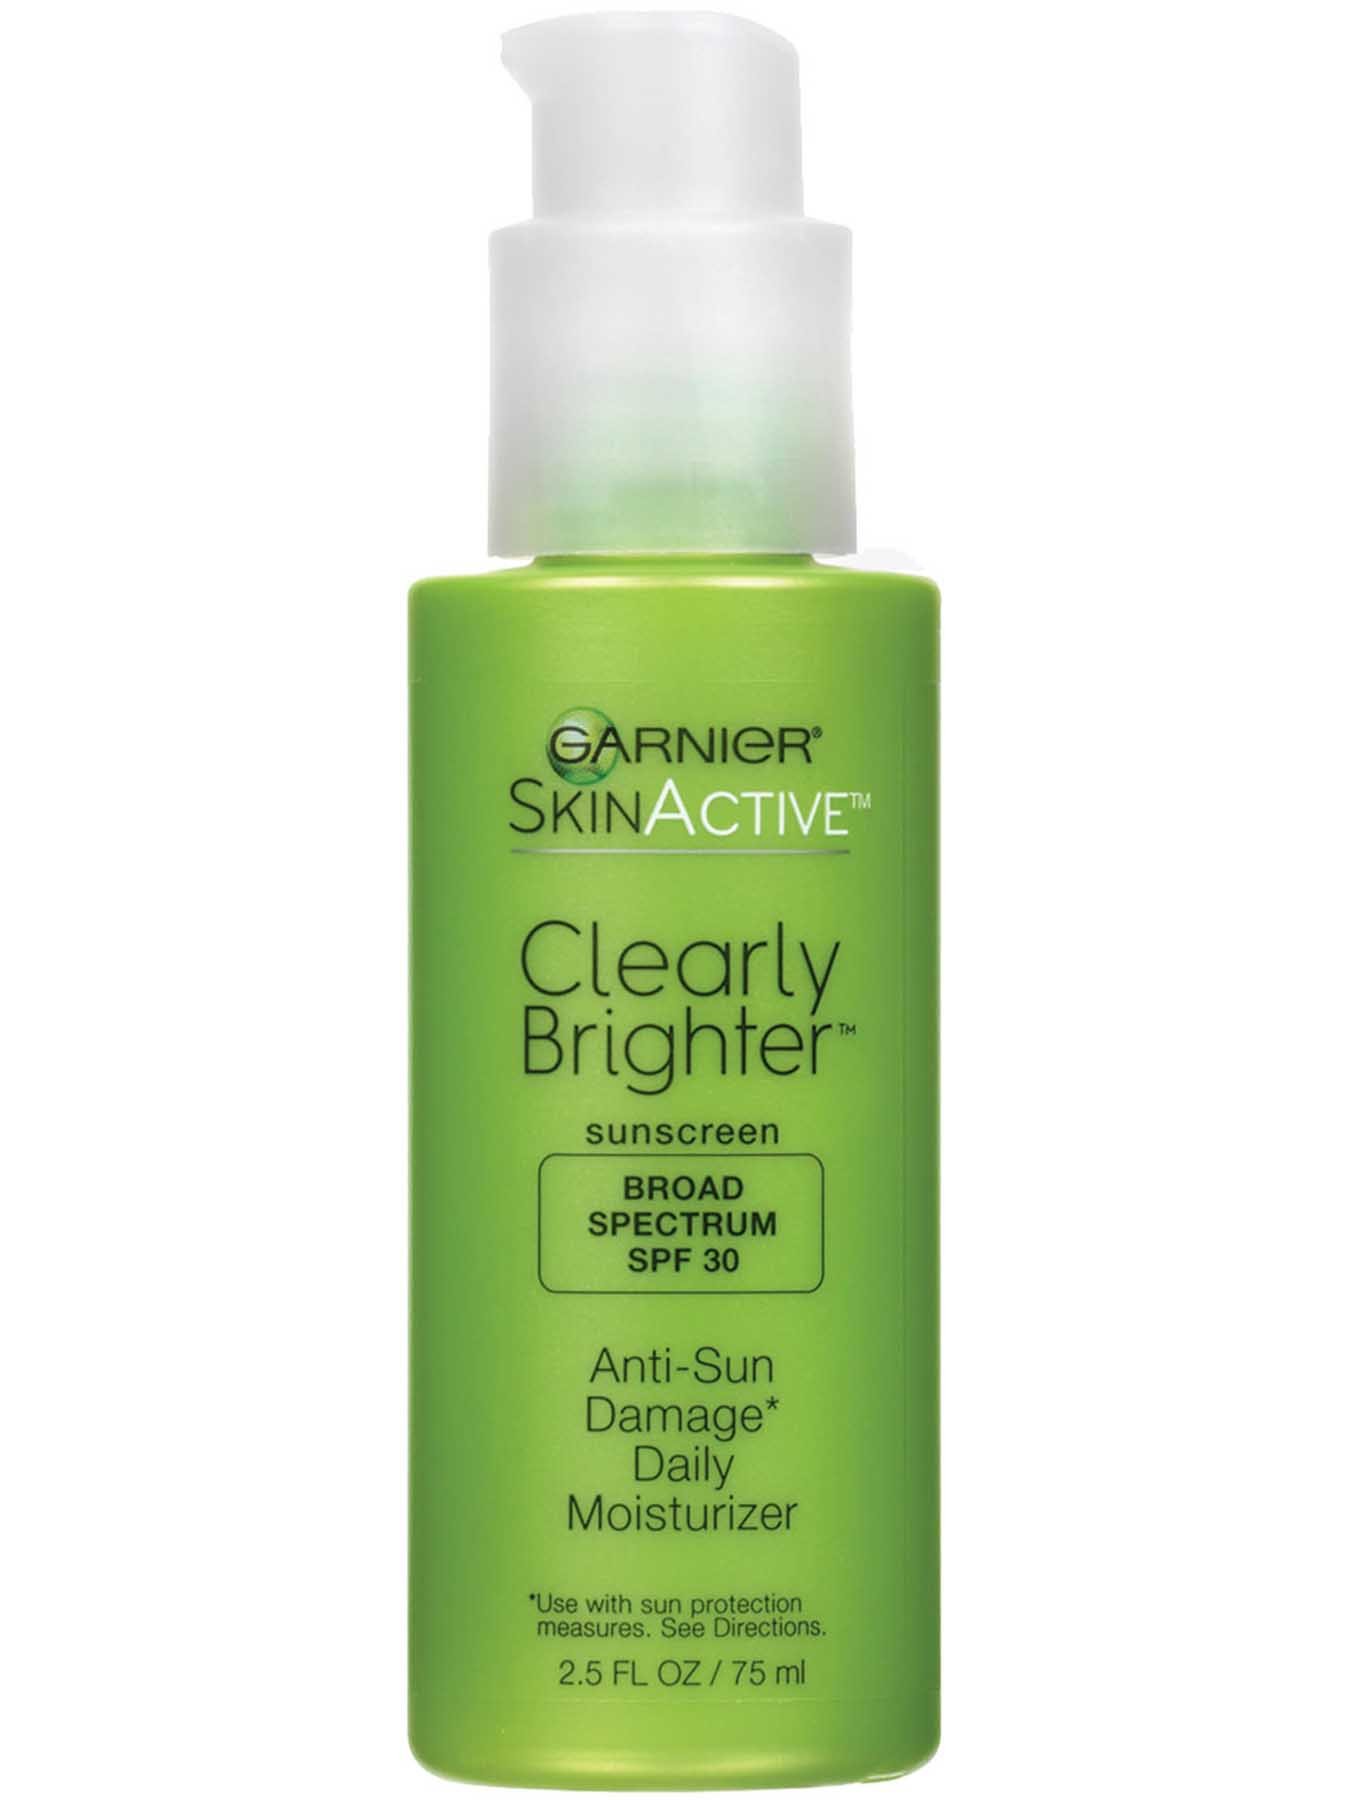 Skin Every Care Products Garnier Skin for | Type